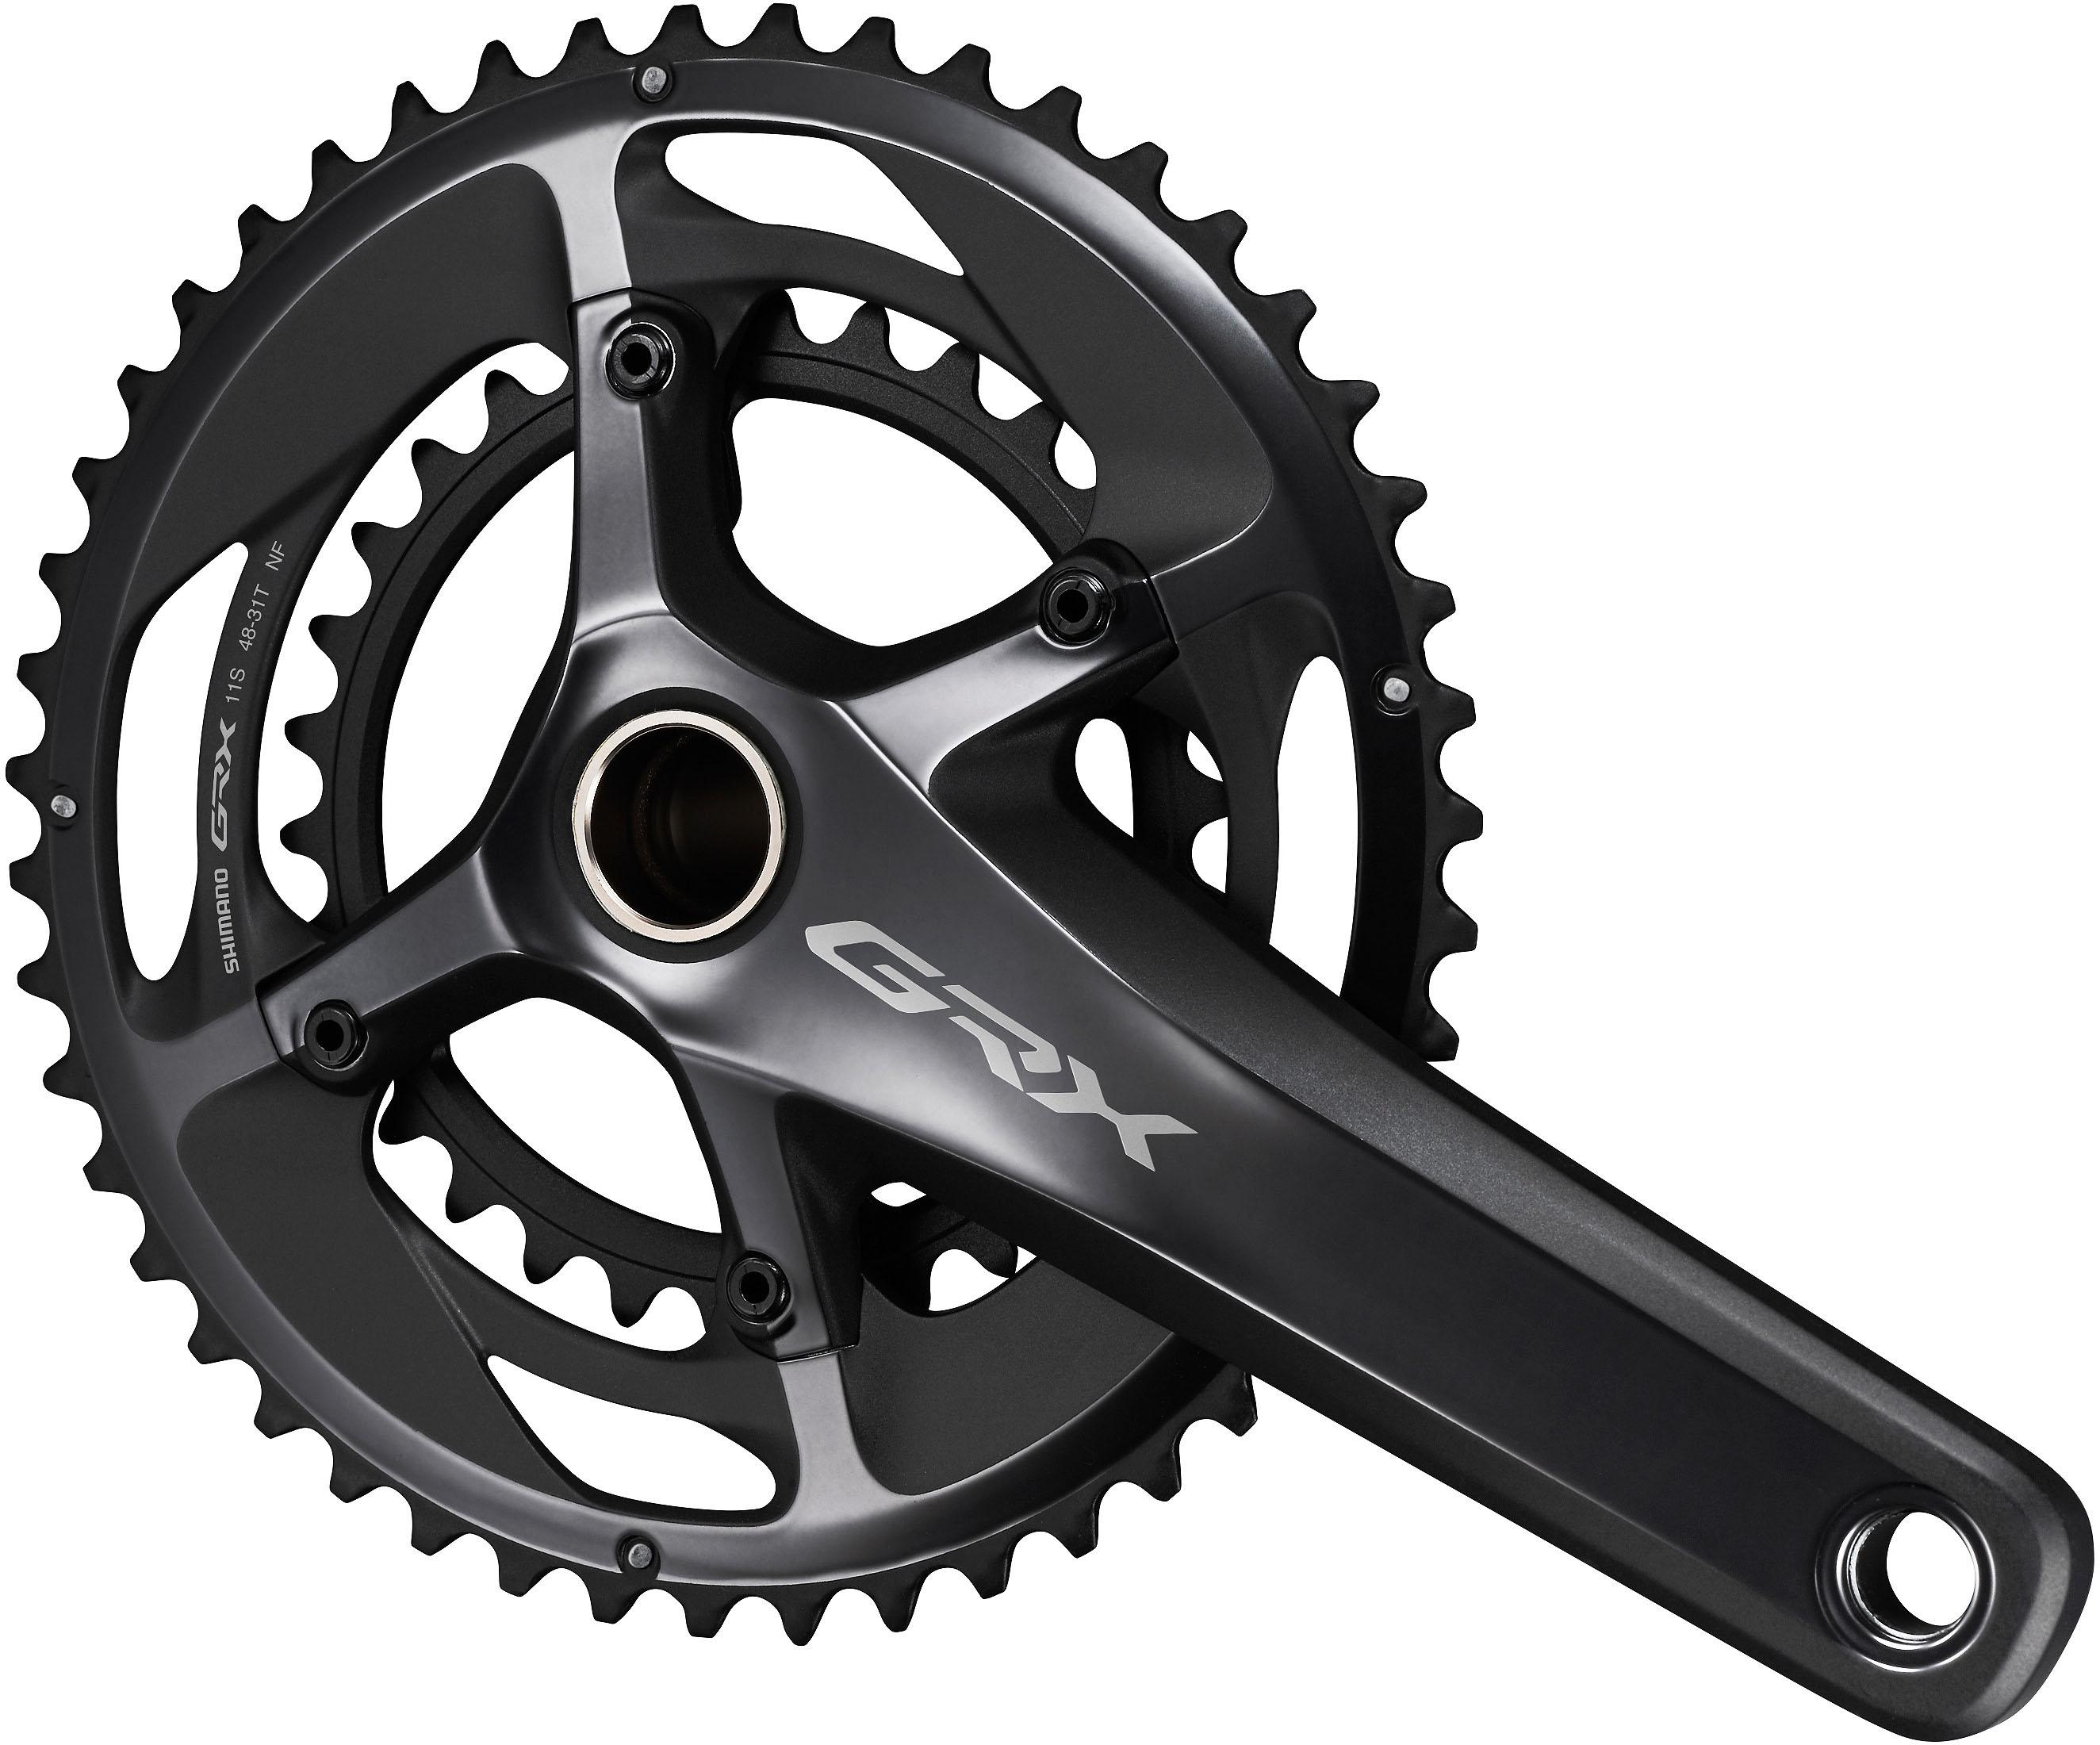 Shimano Grx 810 11 Speed Gravel Double Chainset  Black